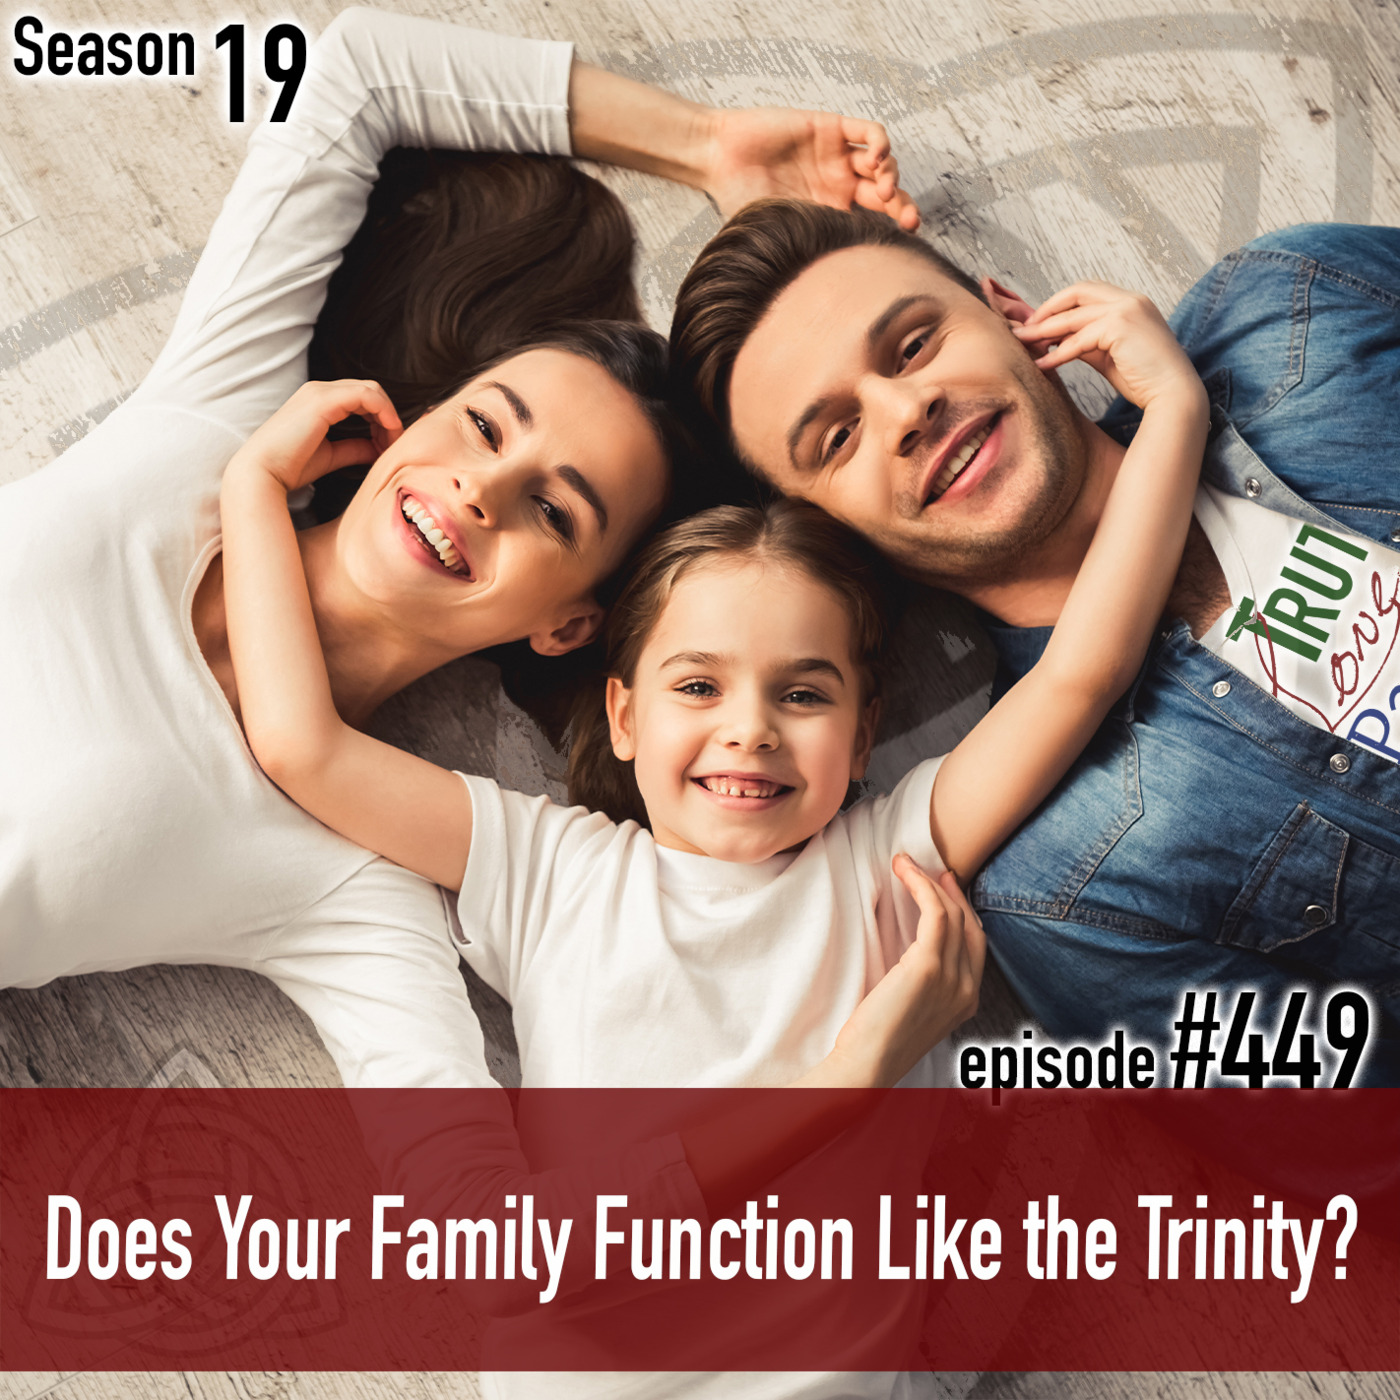 Episode 449: TLP 449: Does Your Family Function Like the Trinity?